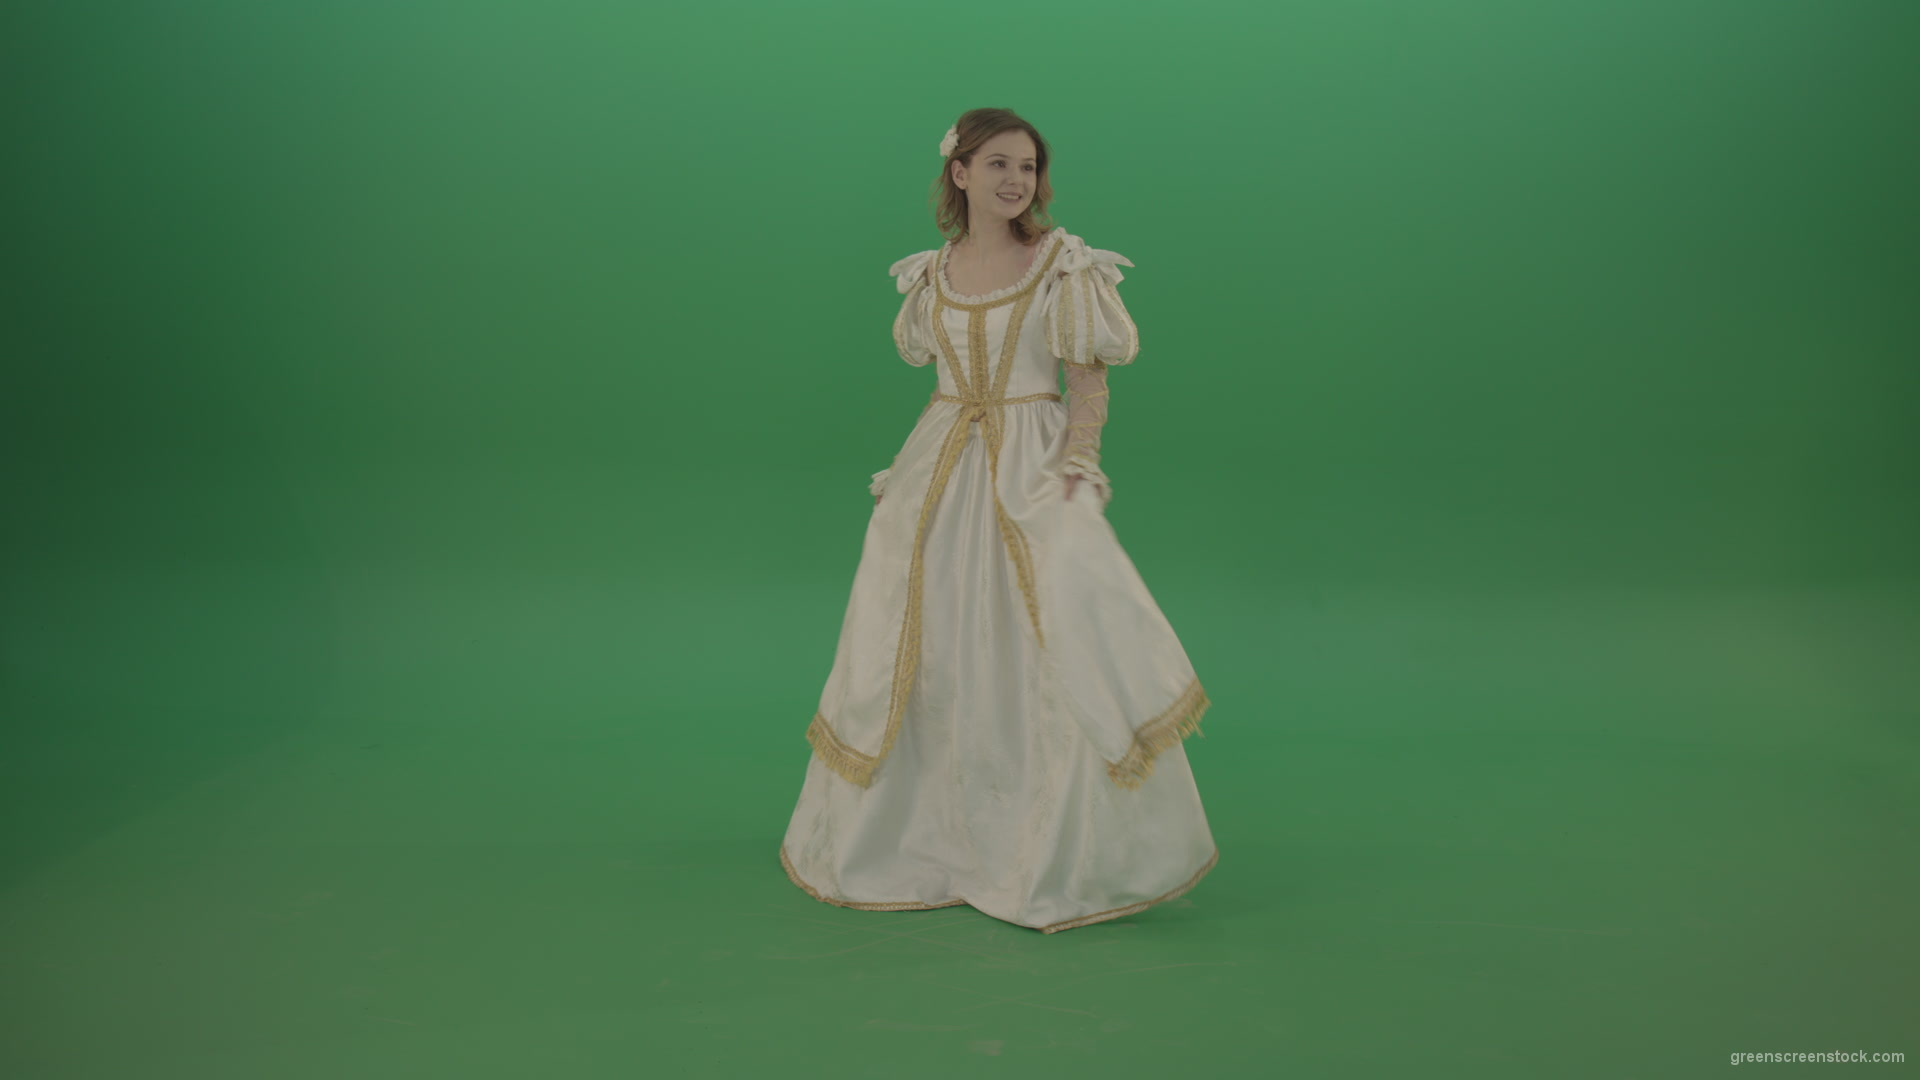 Princess-dances-twisting-around-the-circle-isolated-on-chromakey-background_002 Green Screen Stock